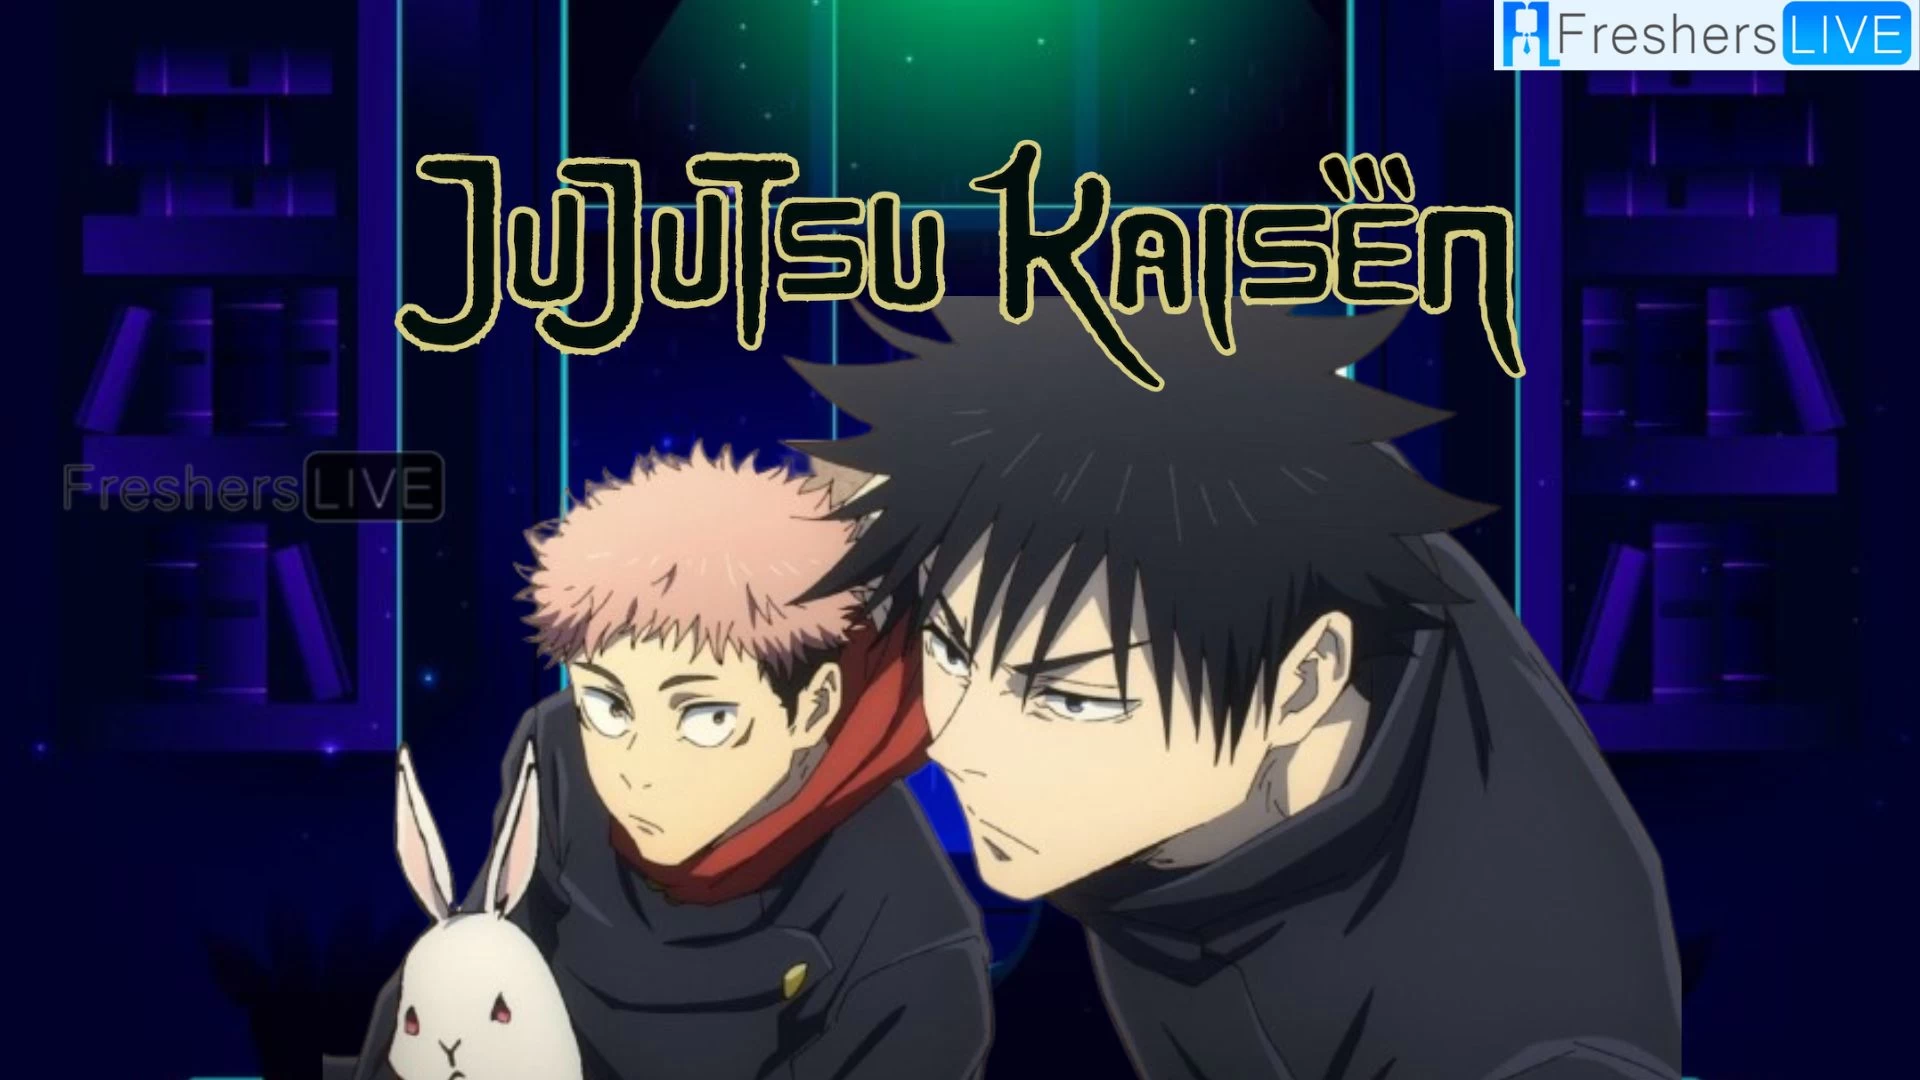 Jujutsu Kaisen Season 2 Episode 11 Ending Explained, Release Date, Cast, Plot, Where to Watch and More